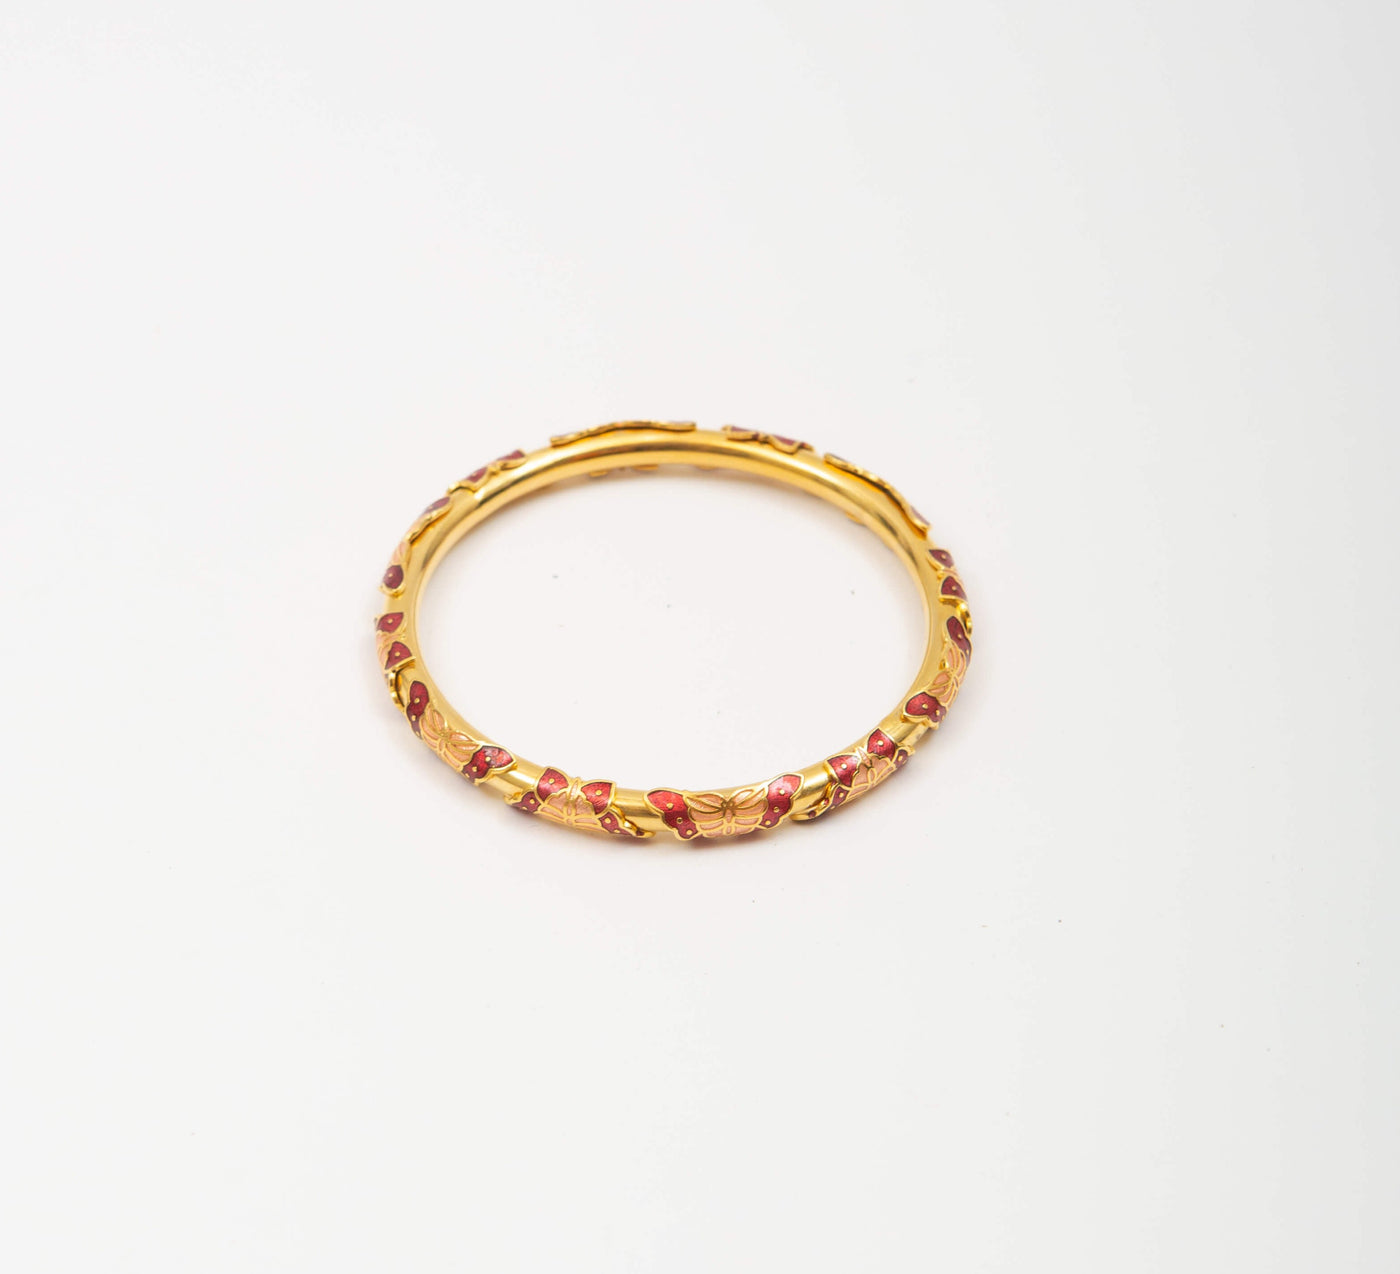 Gold toned bracelet with red cloisonne butterflies attached